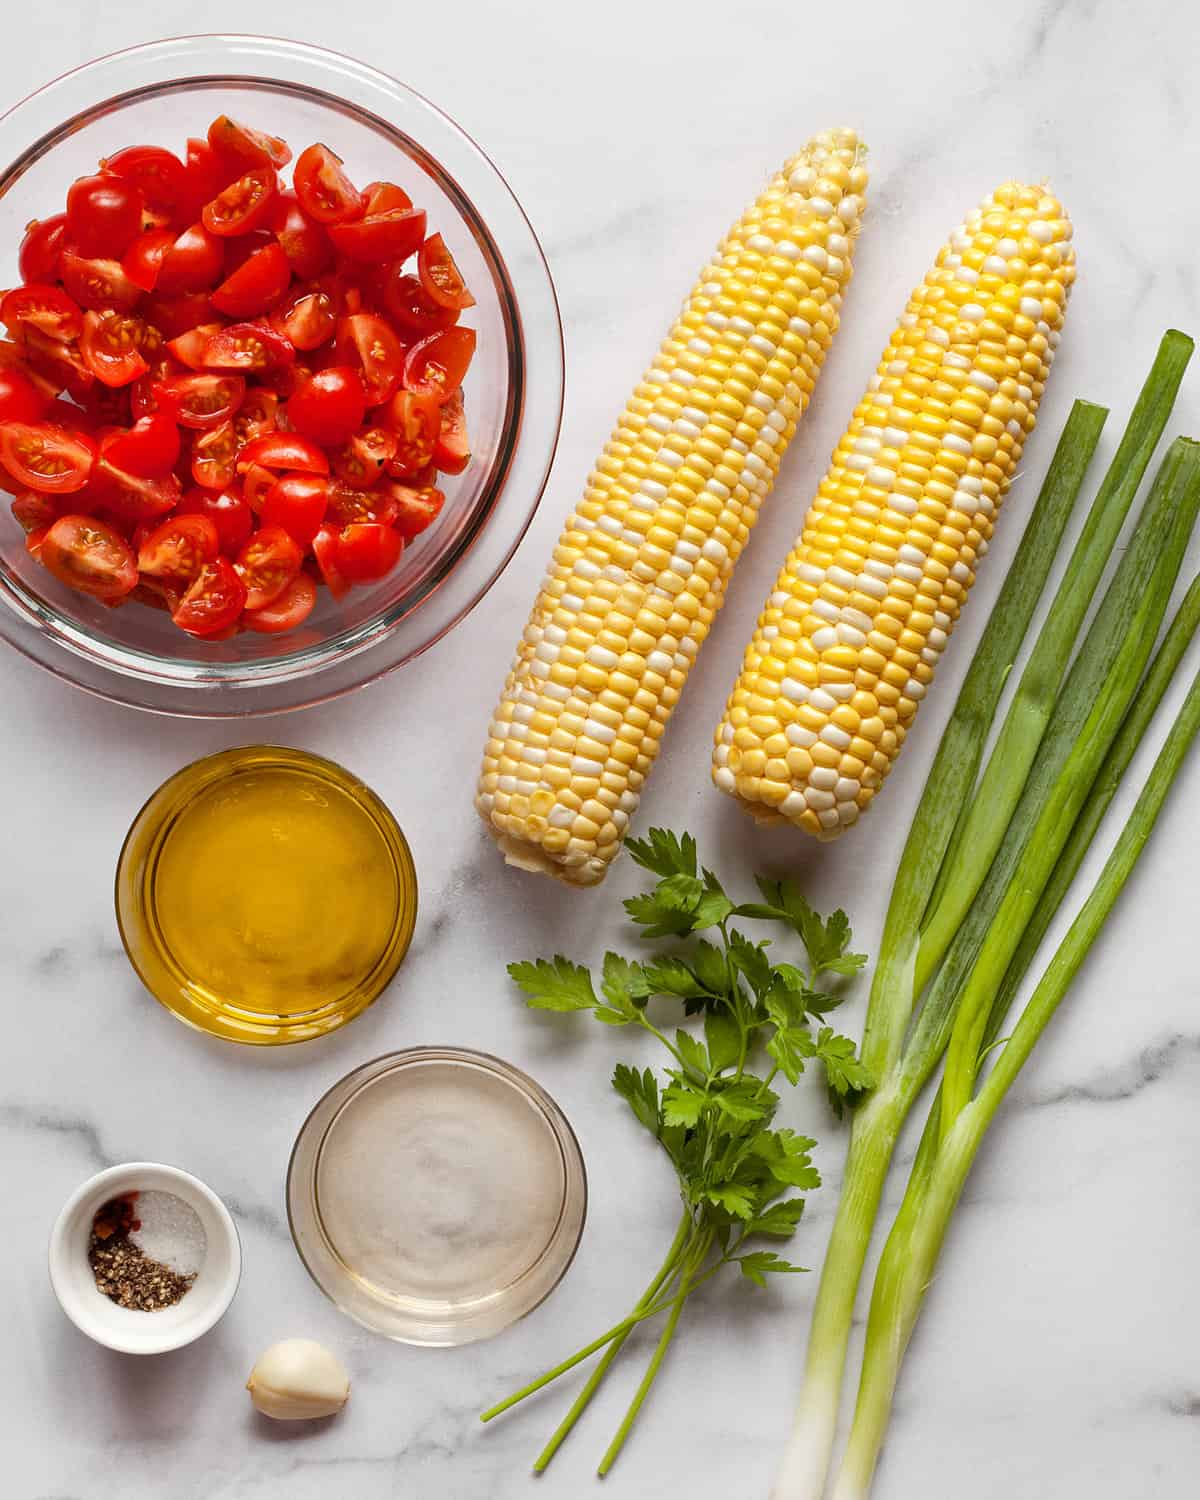 Ingredients including tomatoes, corn, scallions, parsley, olive oil, and vinegar.